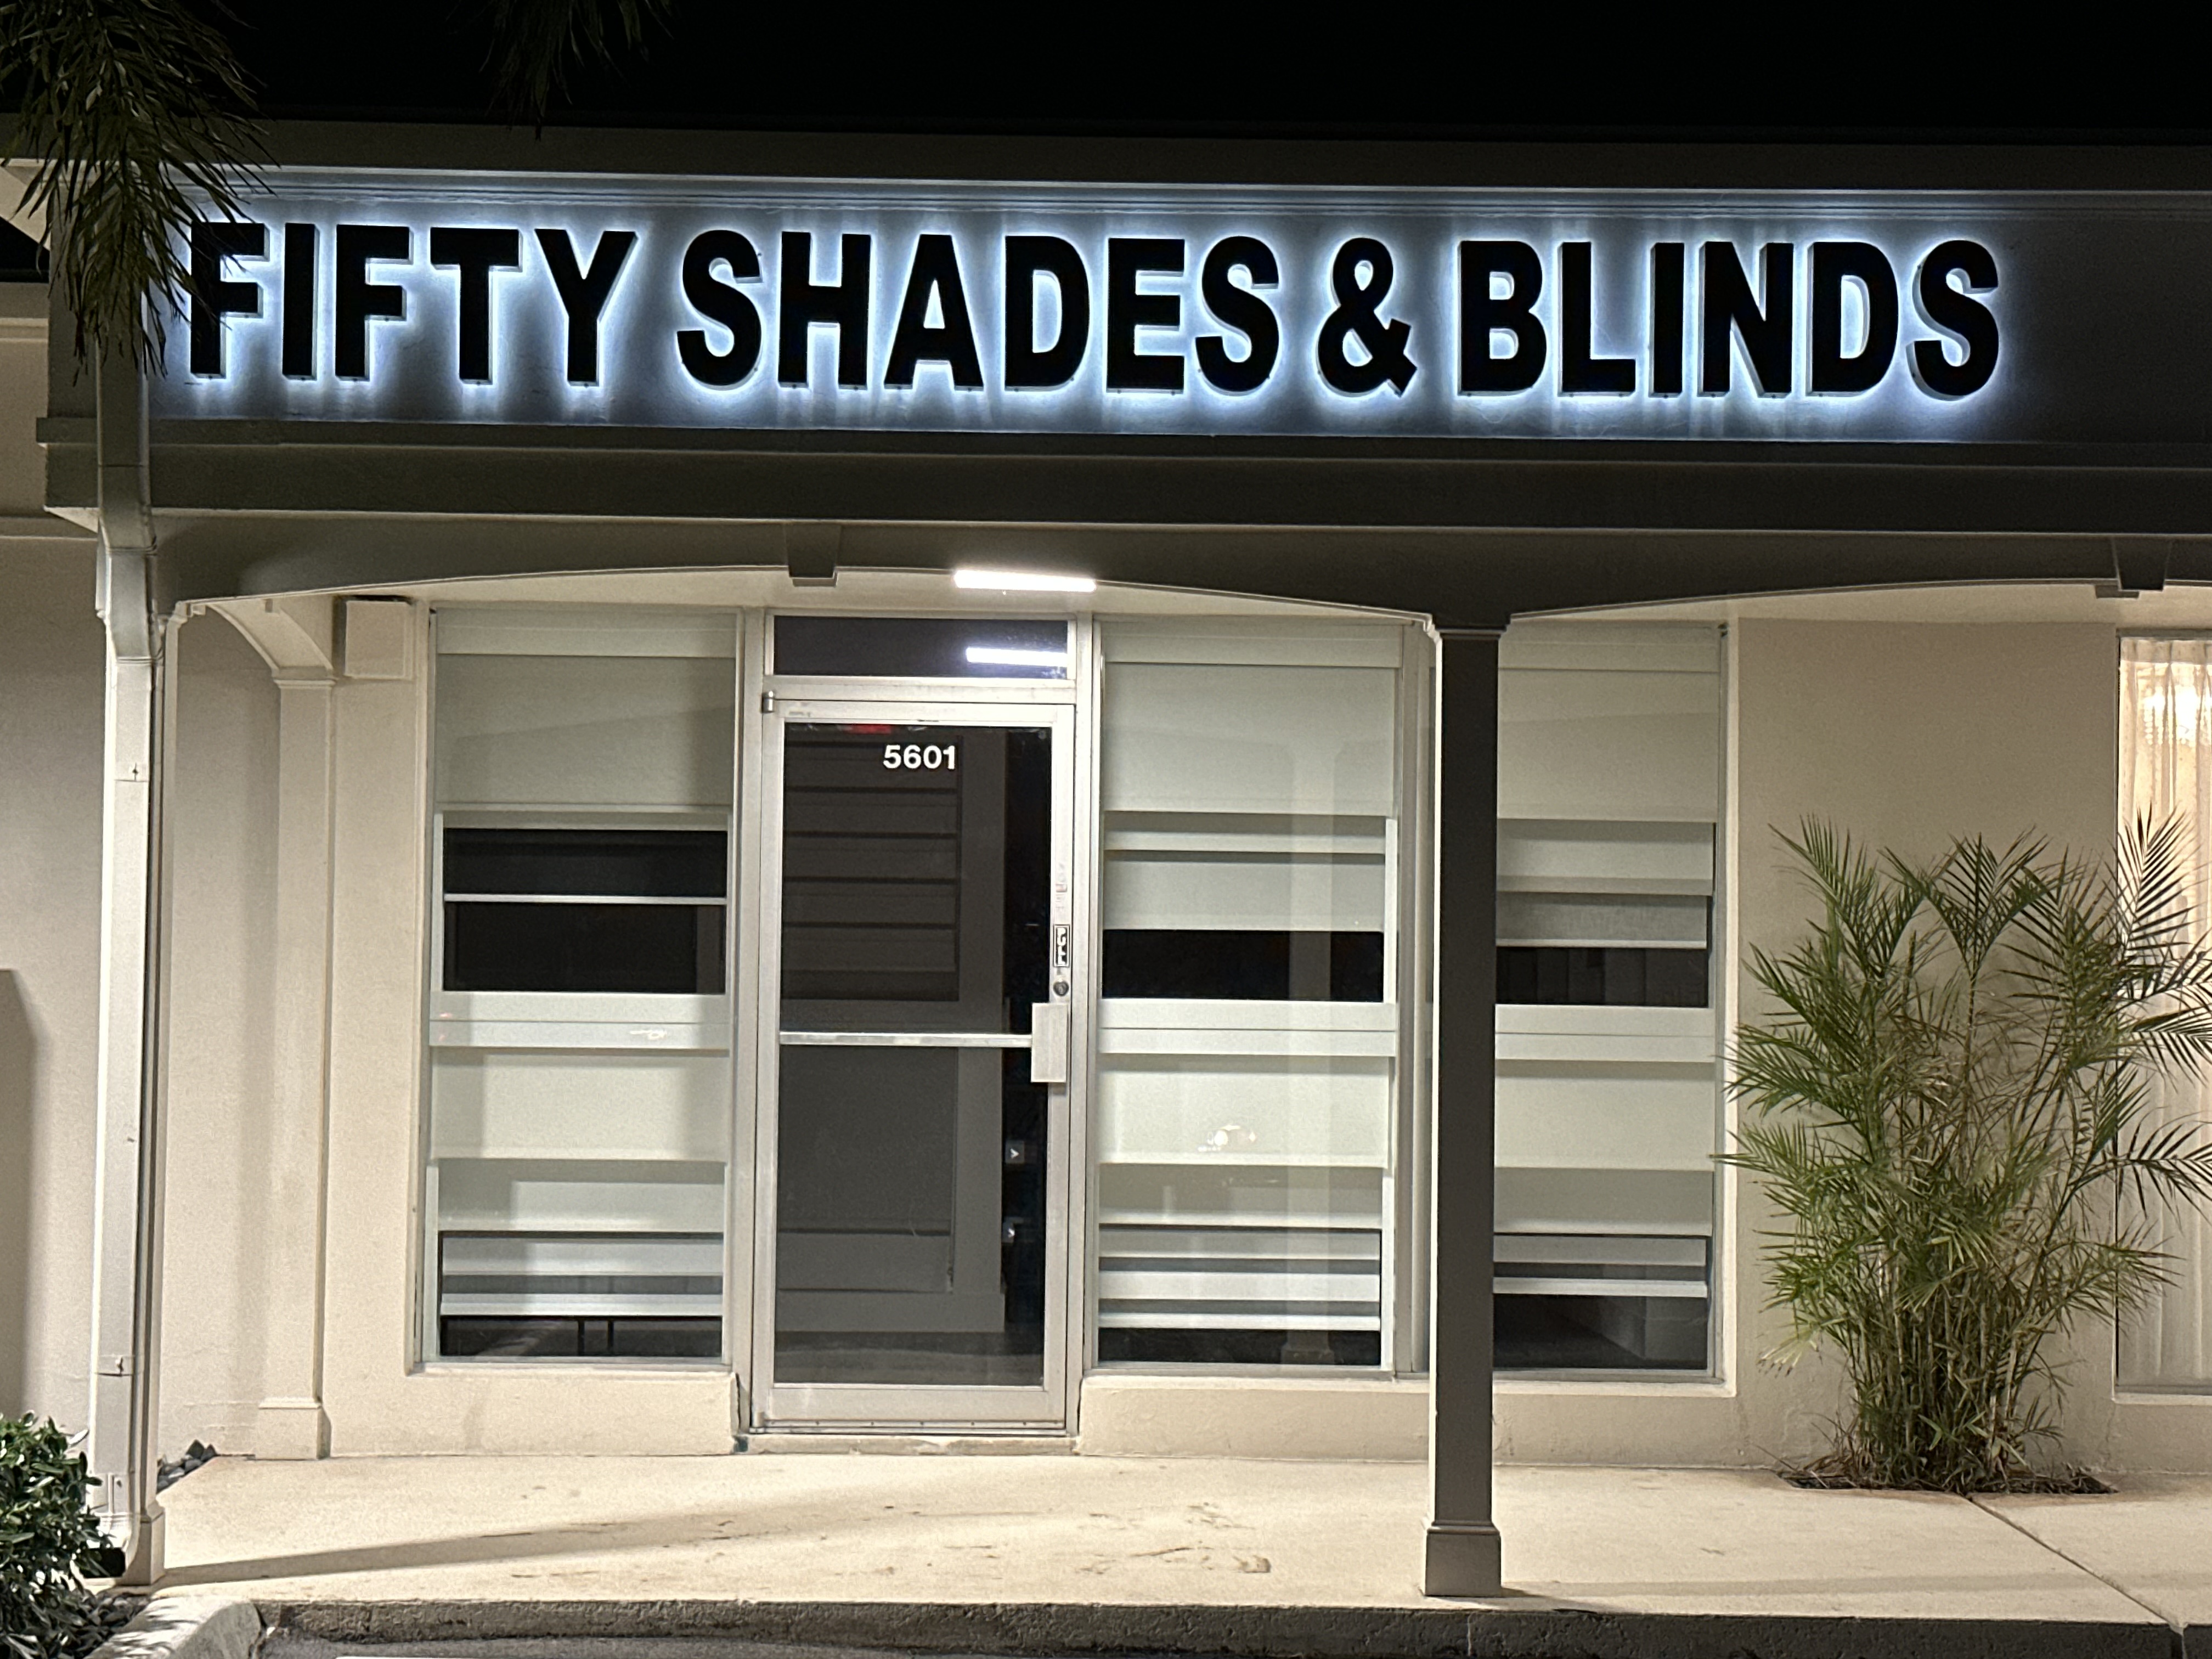 Fifty shades and blinds boca raton